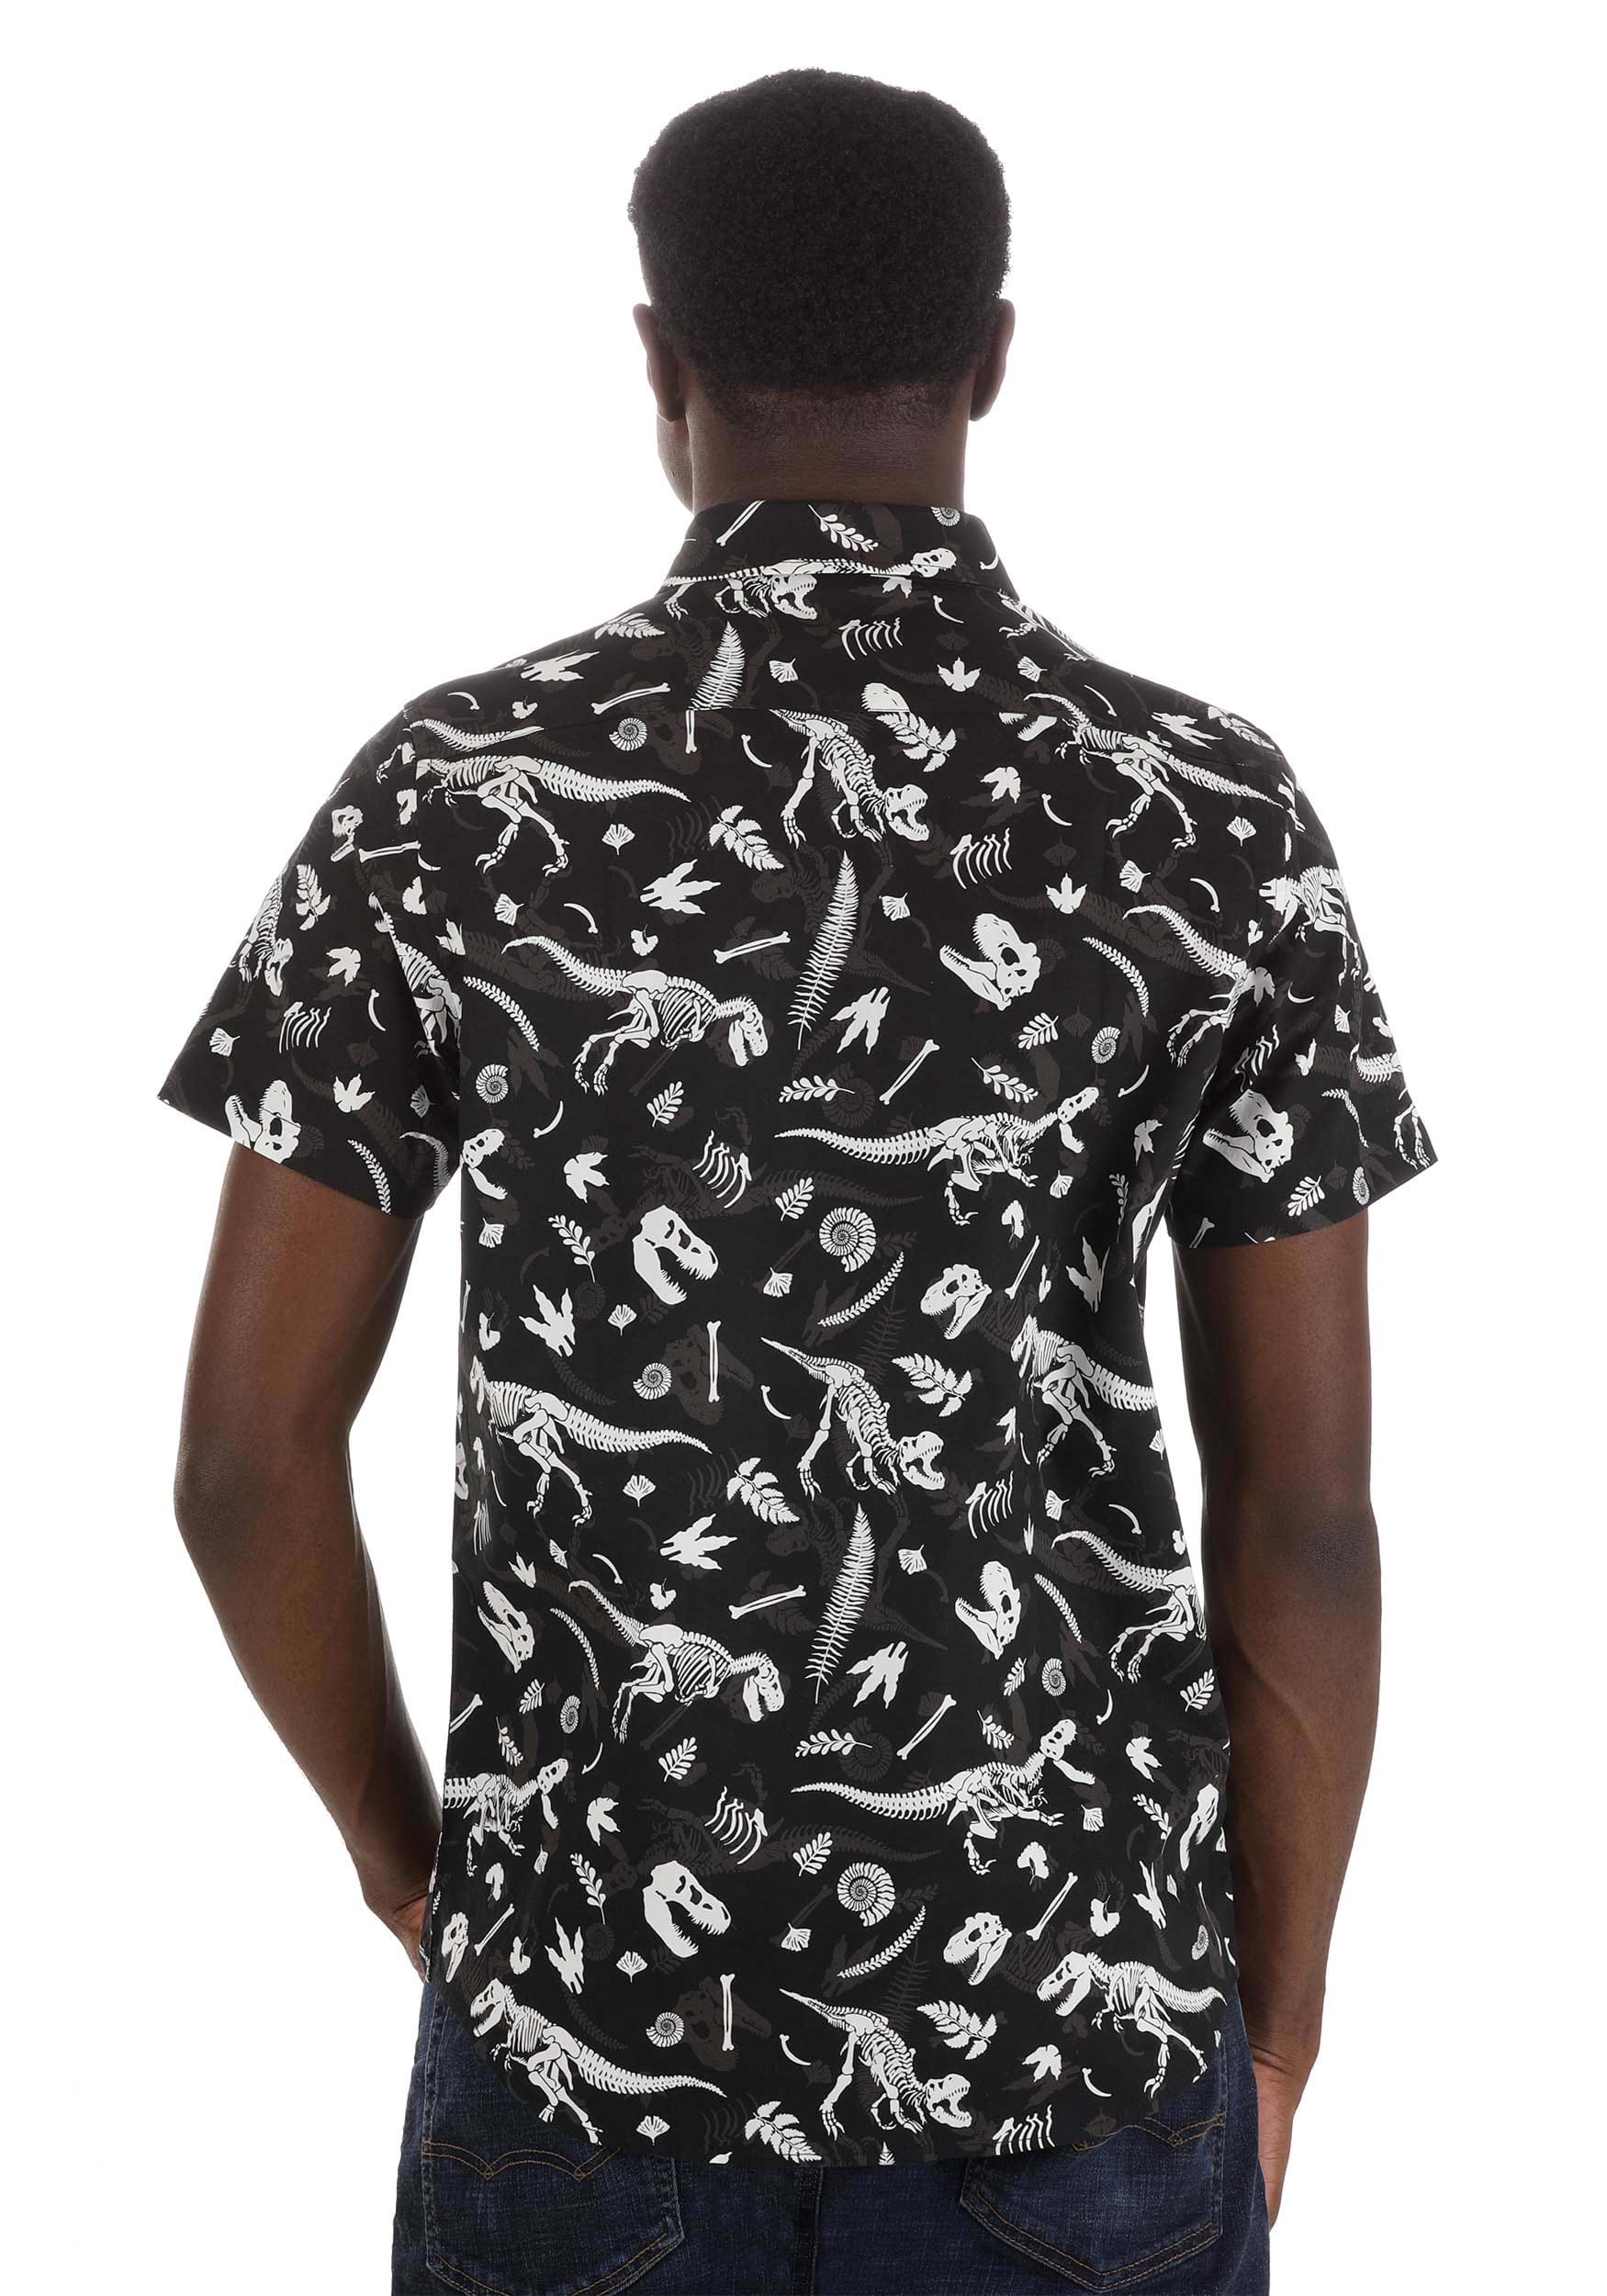 Diggin' Up Dinosaurs Button Up Shirt For Adults